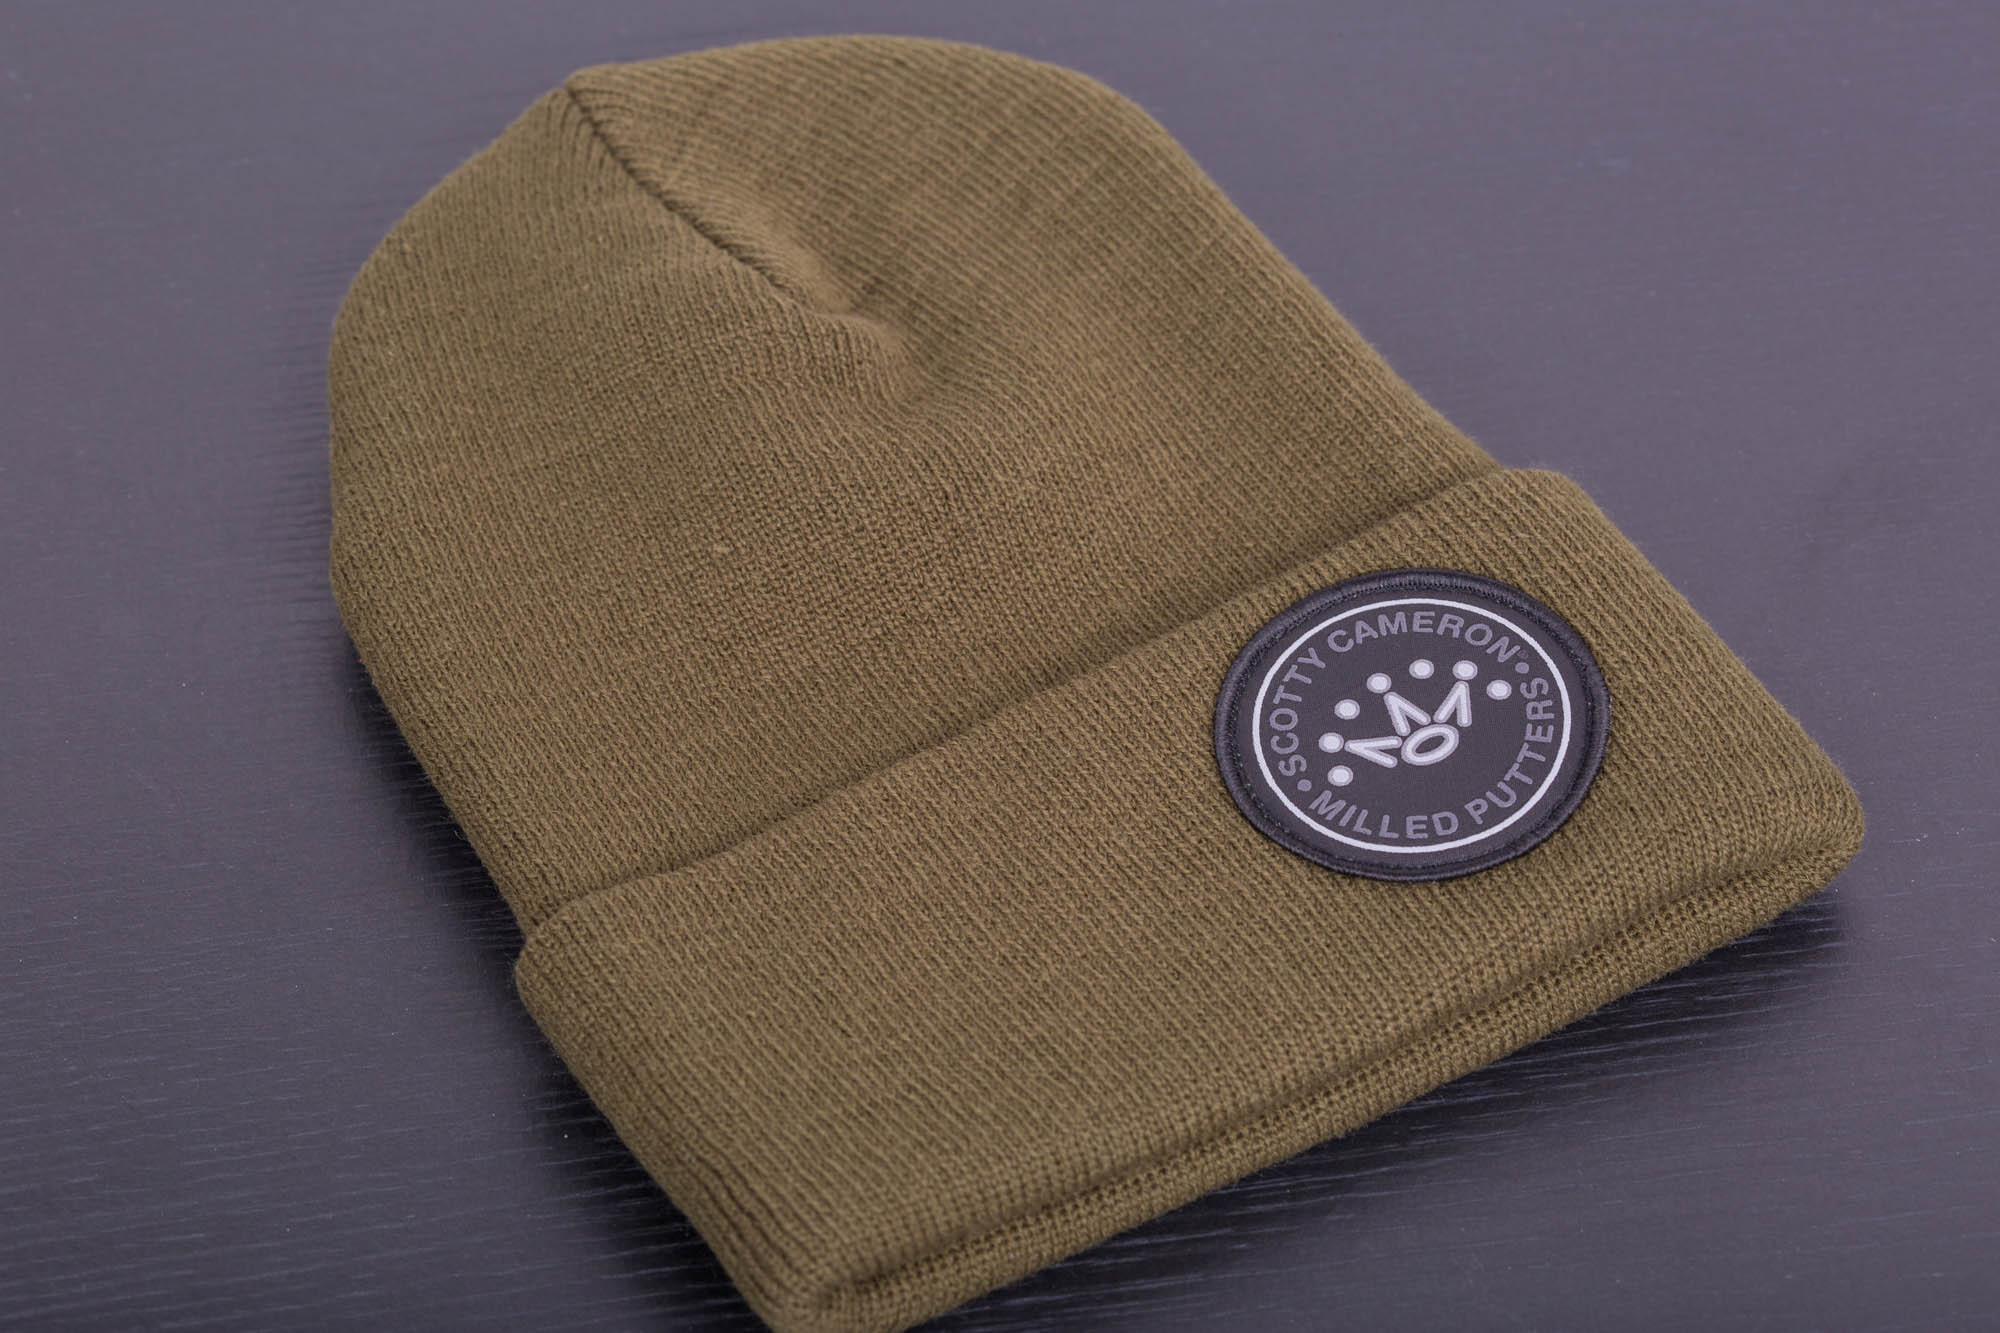 2017 Holiday 7 Point Crown Circle Patch Beanie